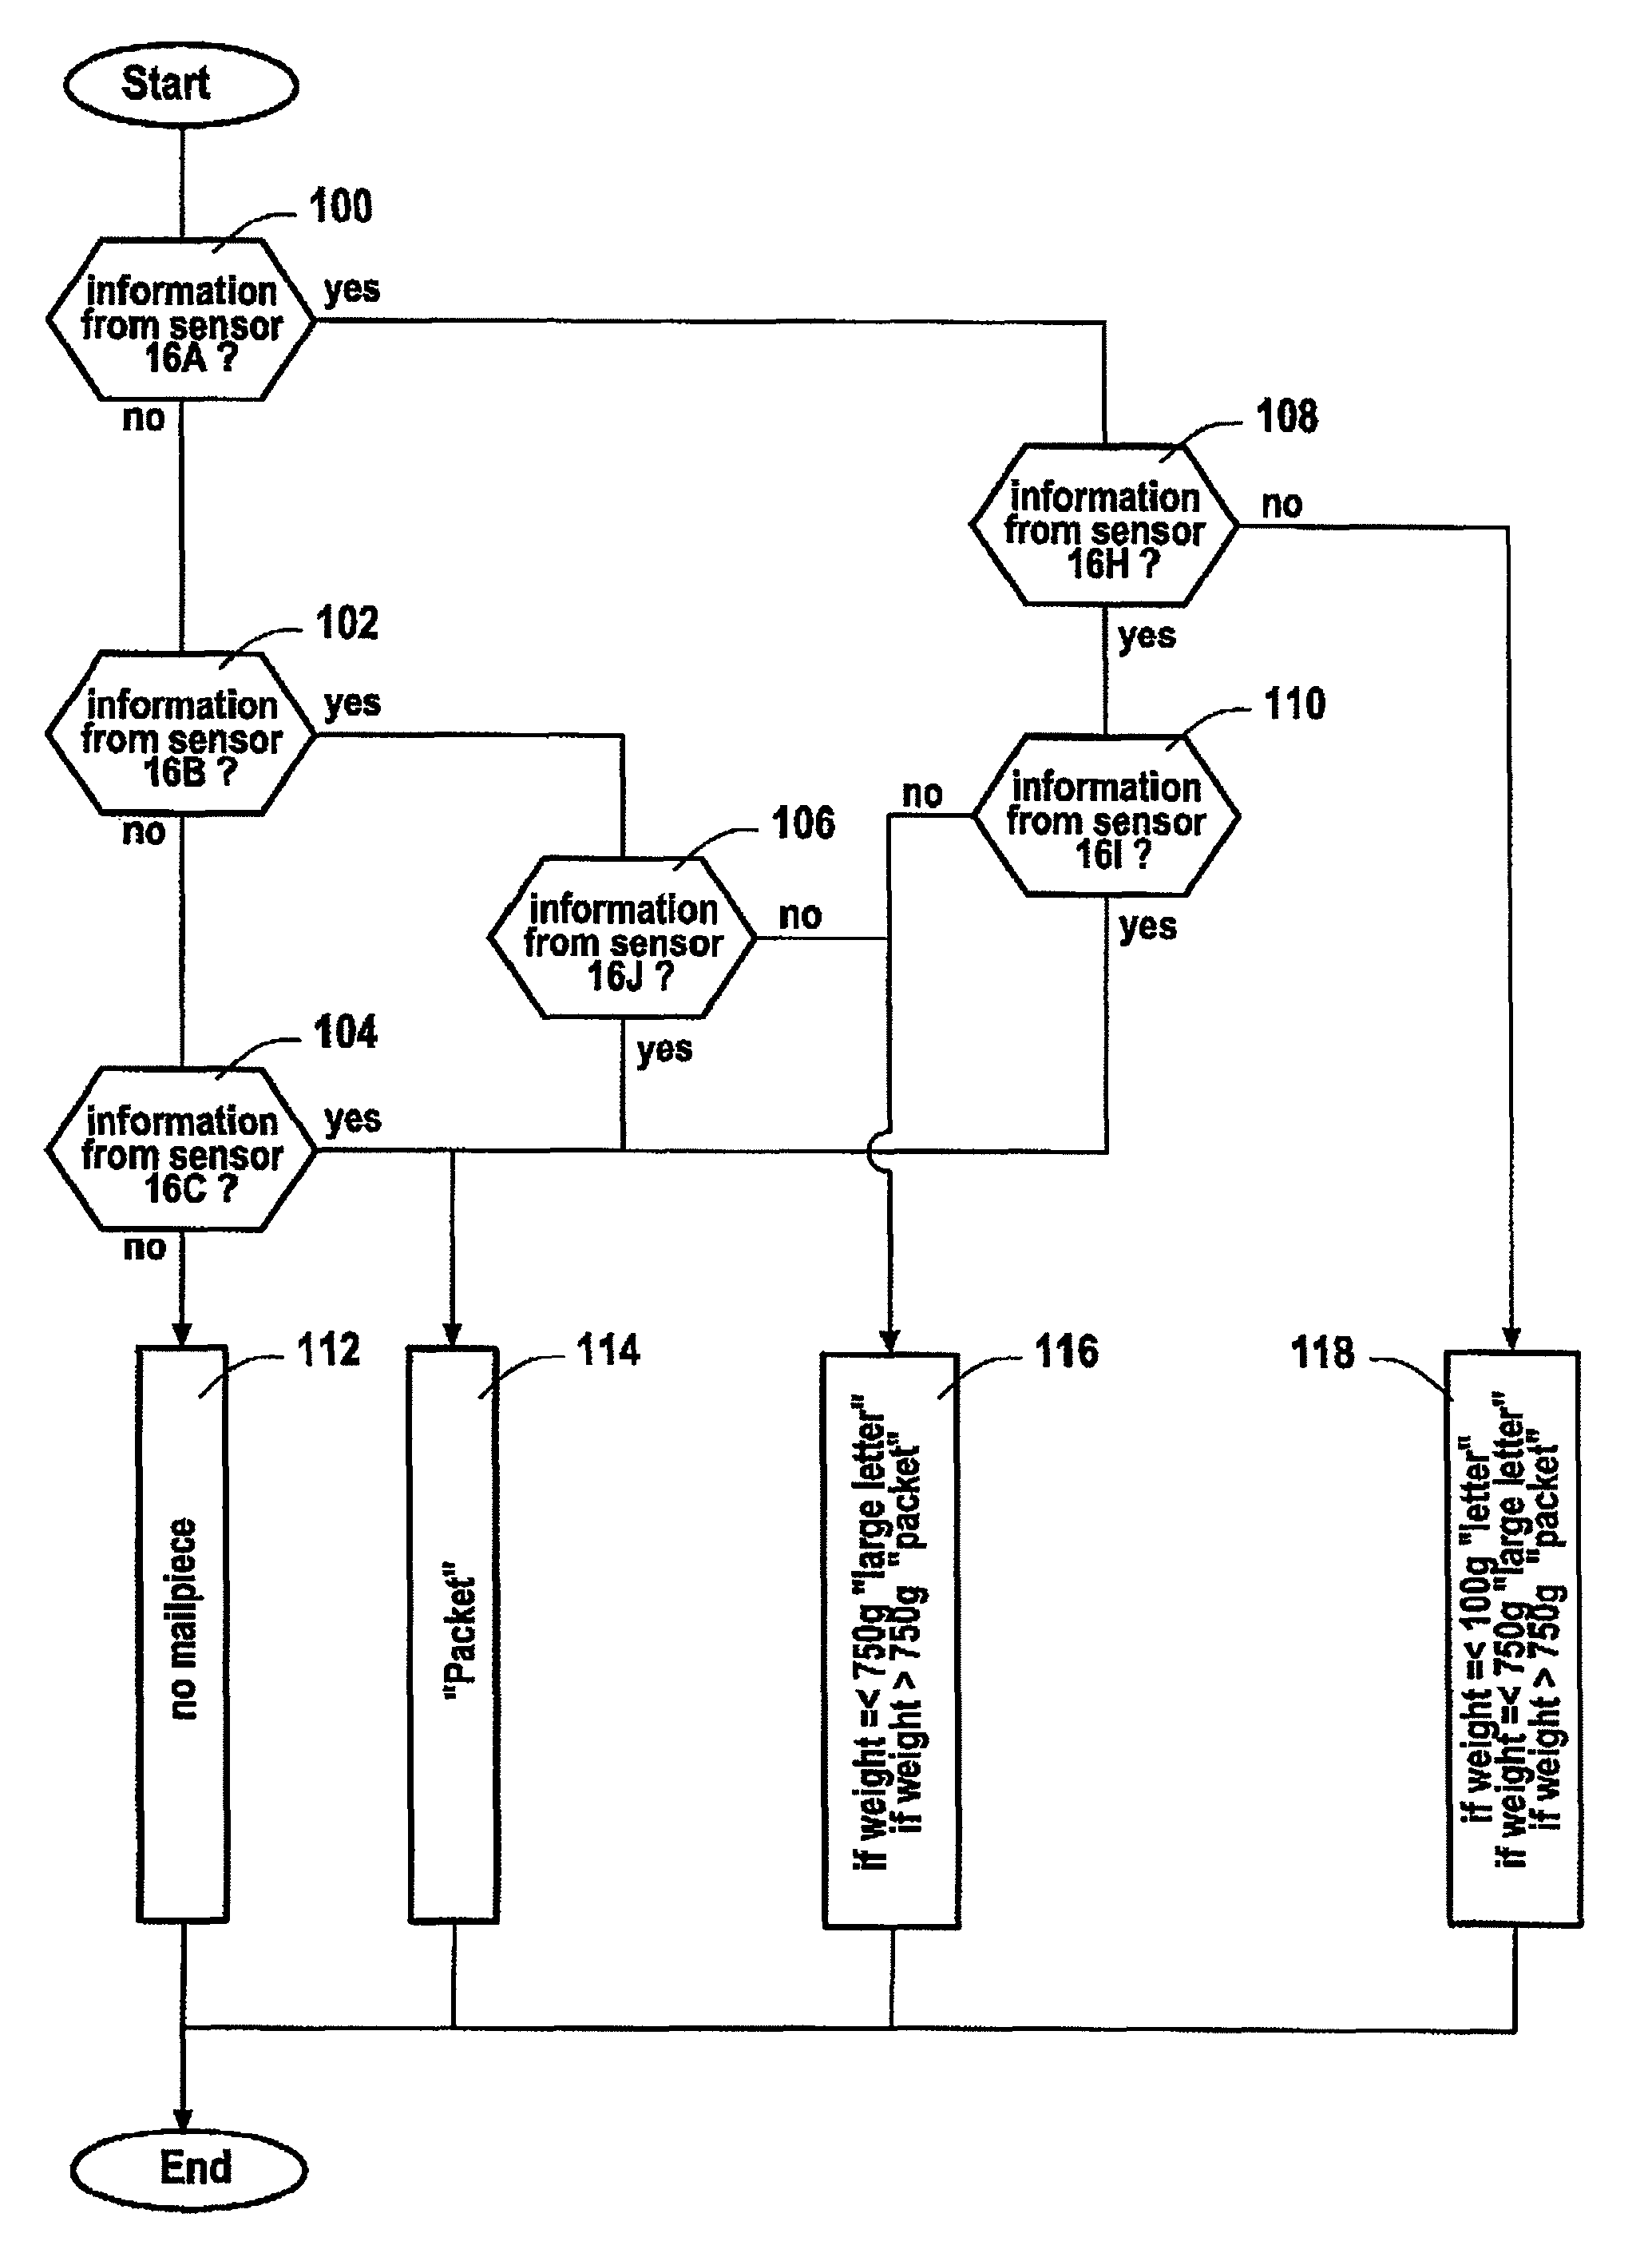 Device for automatically determining a category of mail to which a mailpiece delivered to a franking system belongs